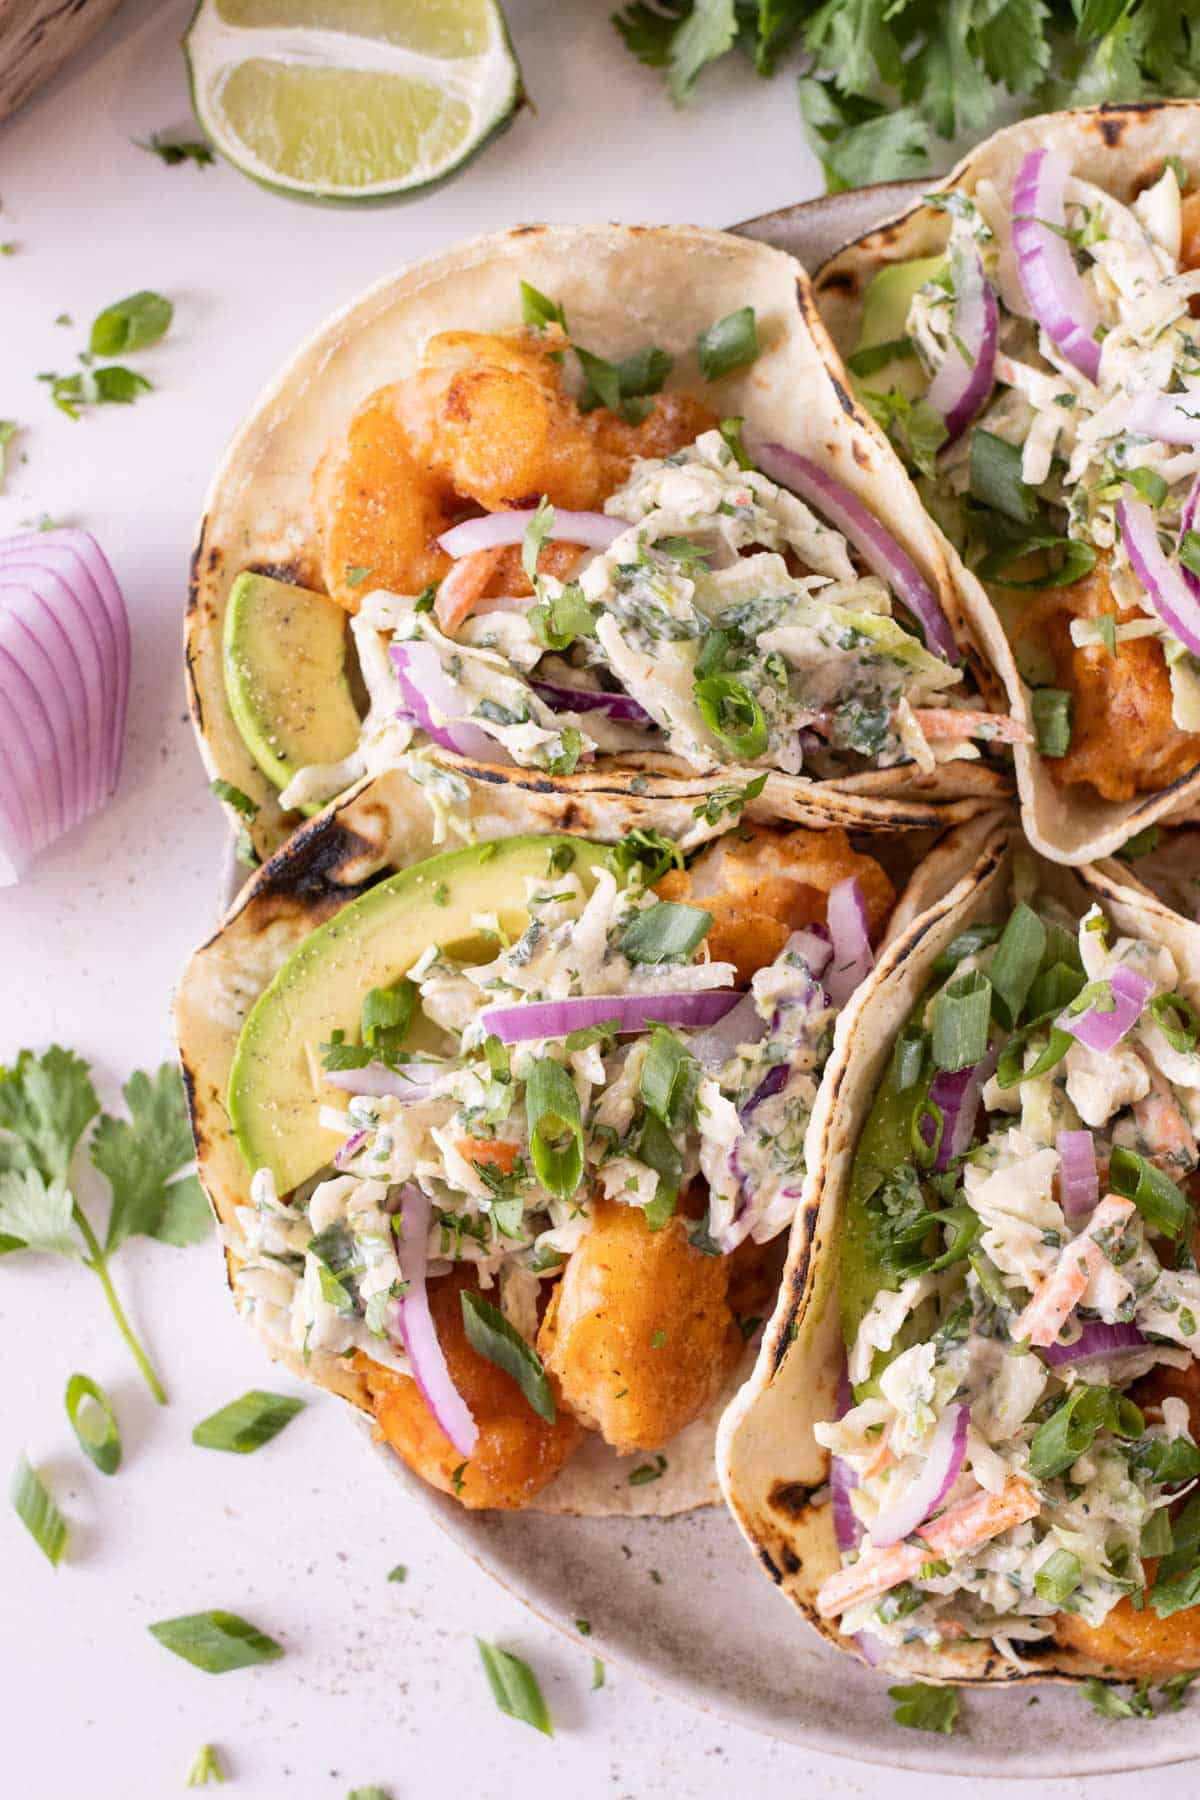 A plate full of Baja shrimp tacos are ready to serve.